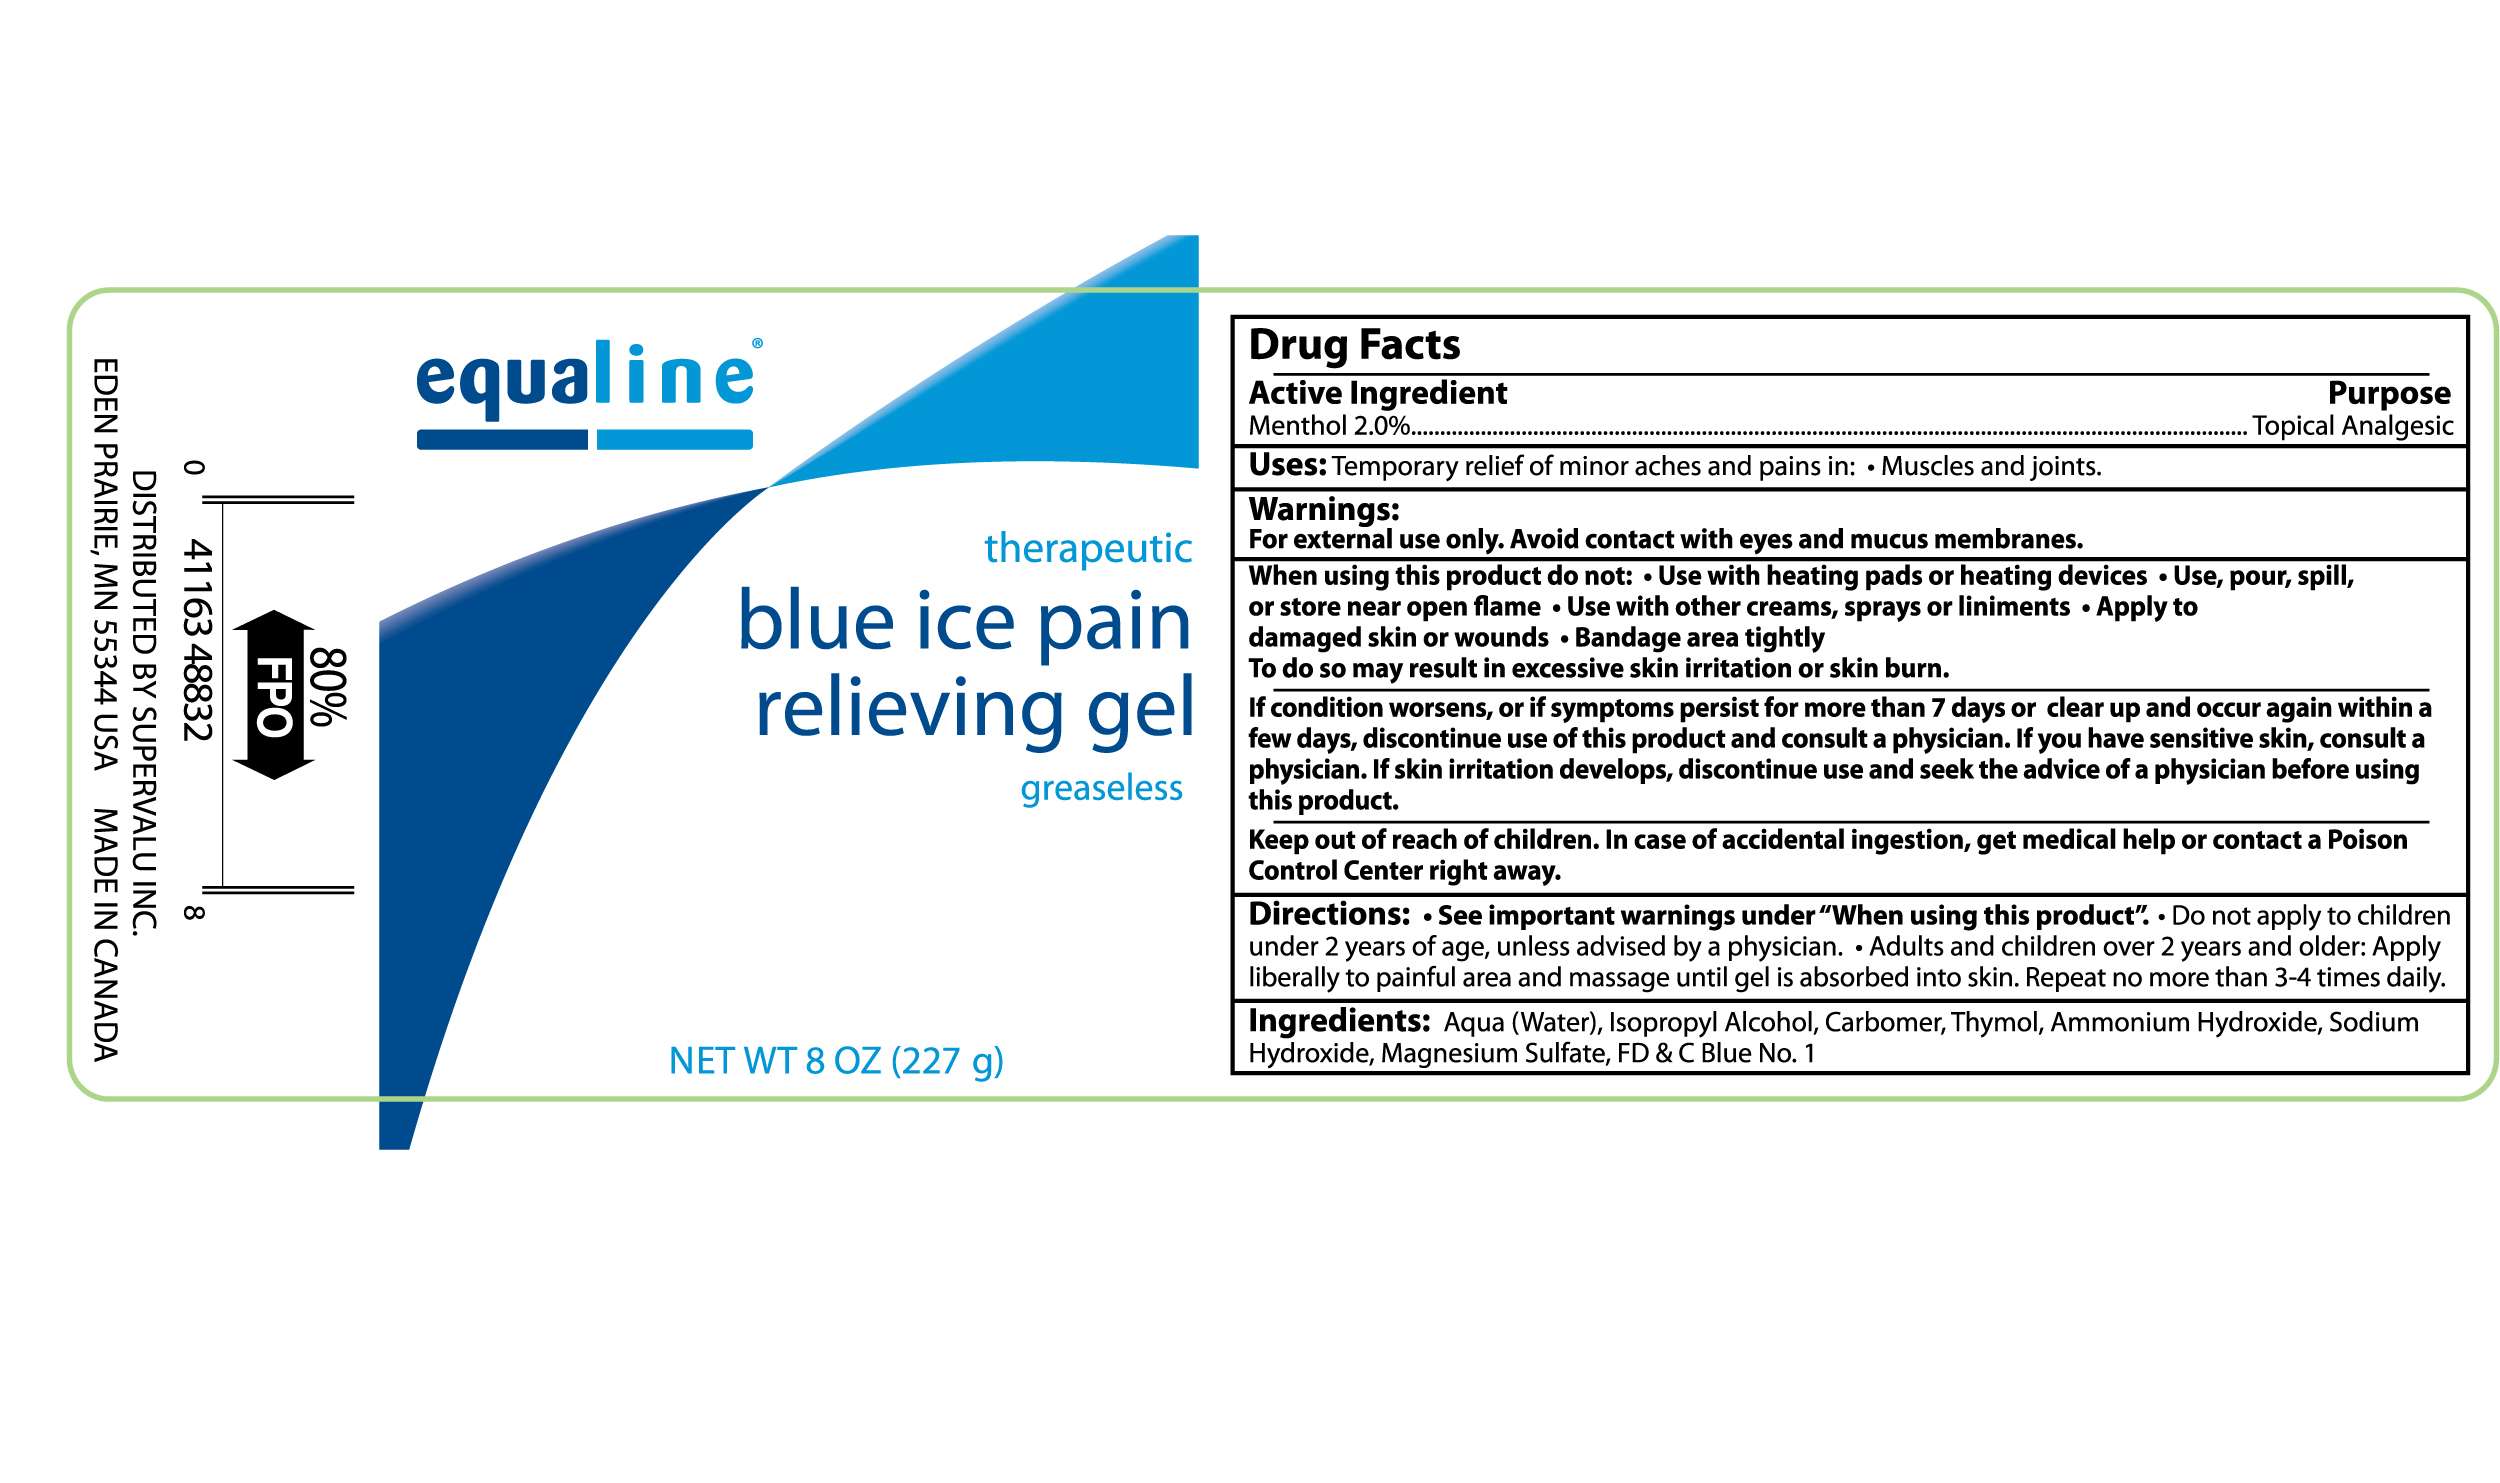 EQUALINE BLUE ICE PAIN RELIEVING